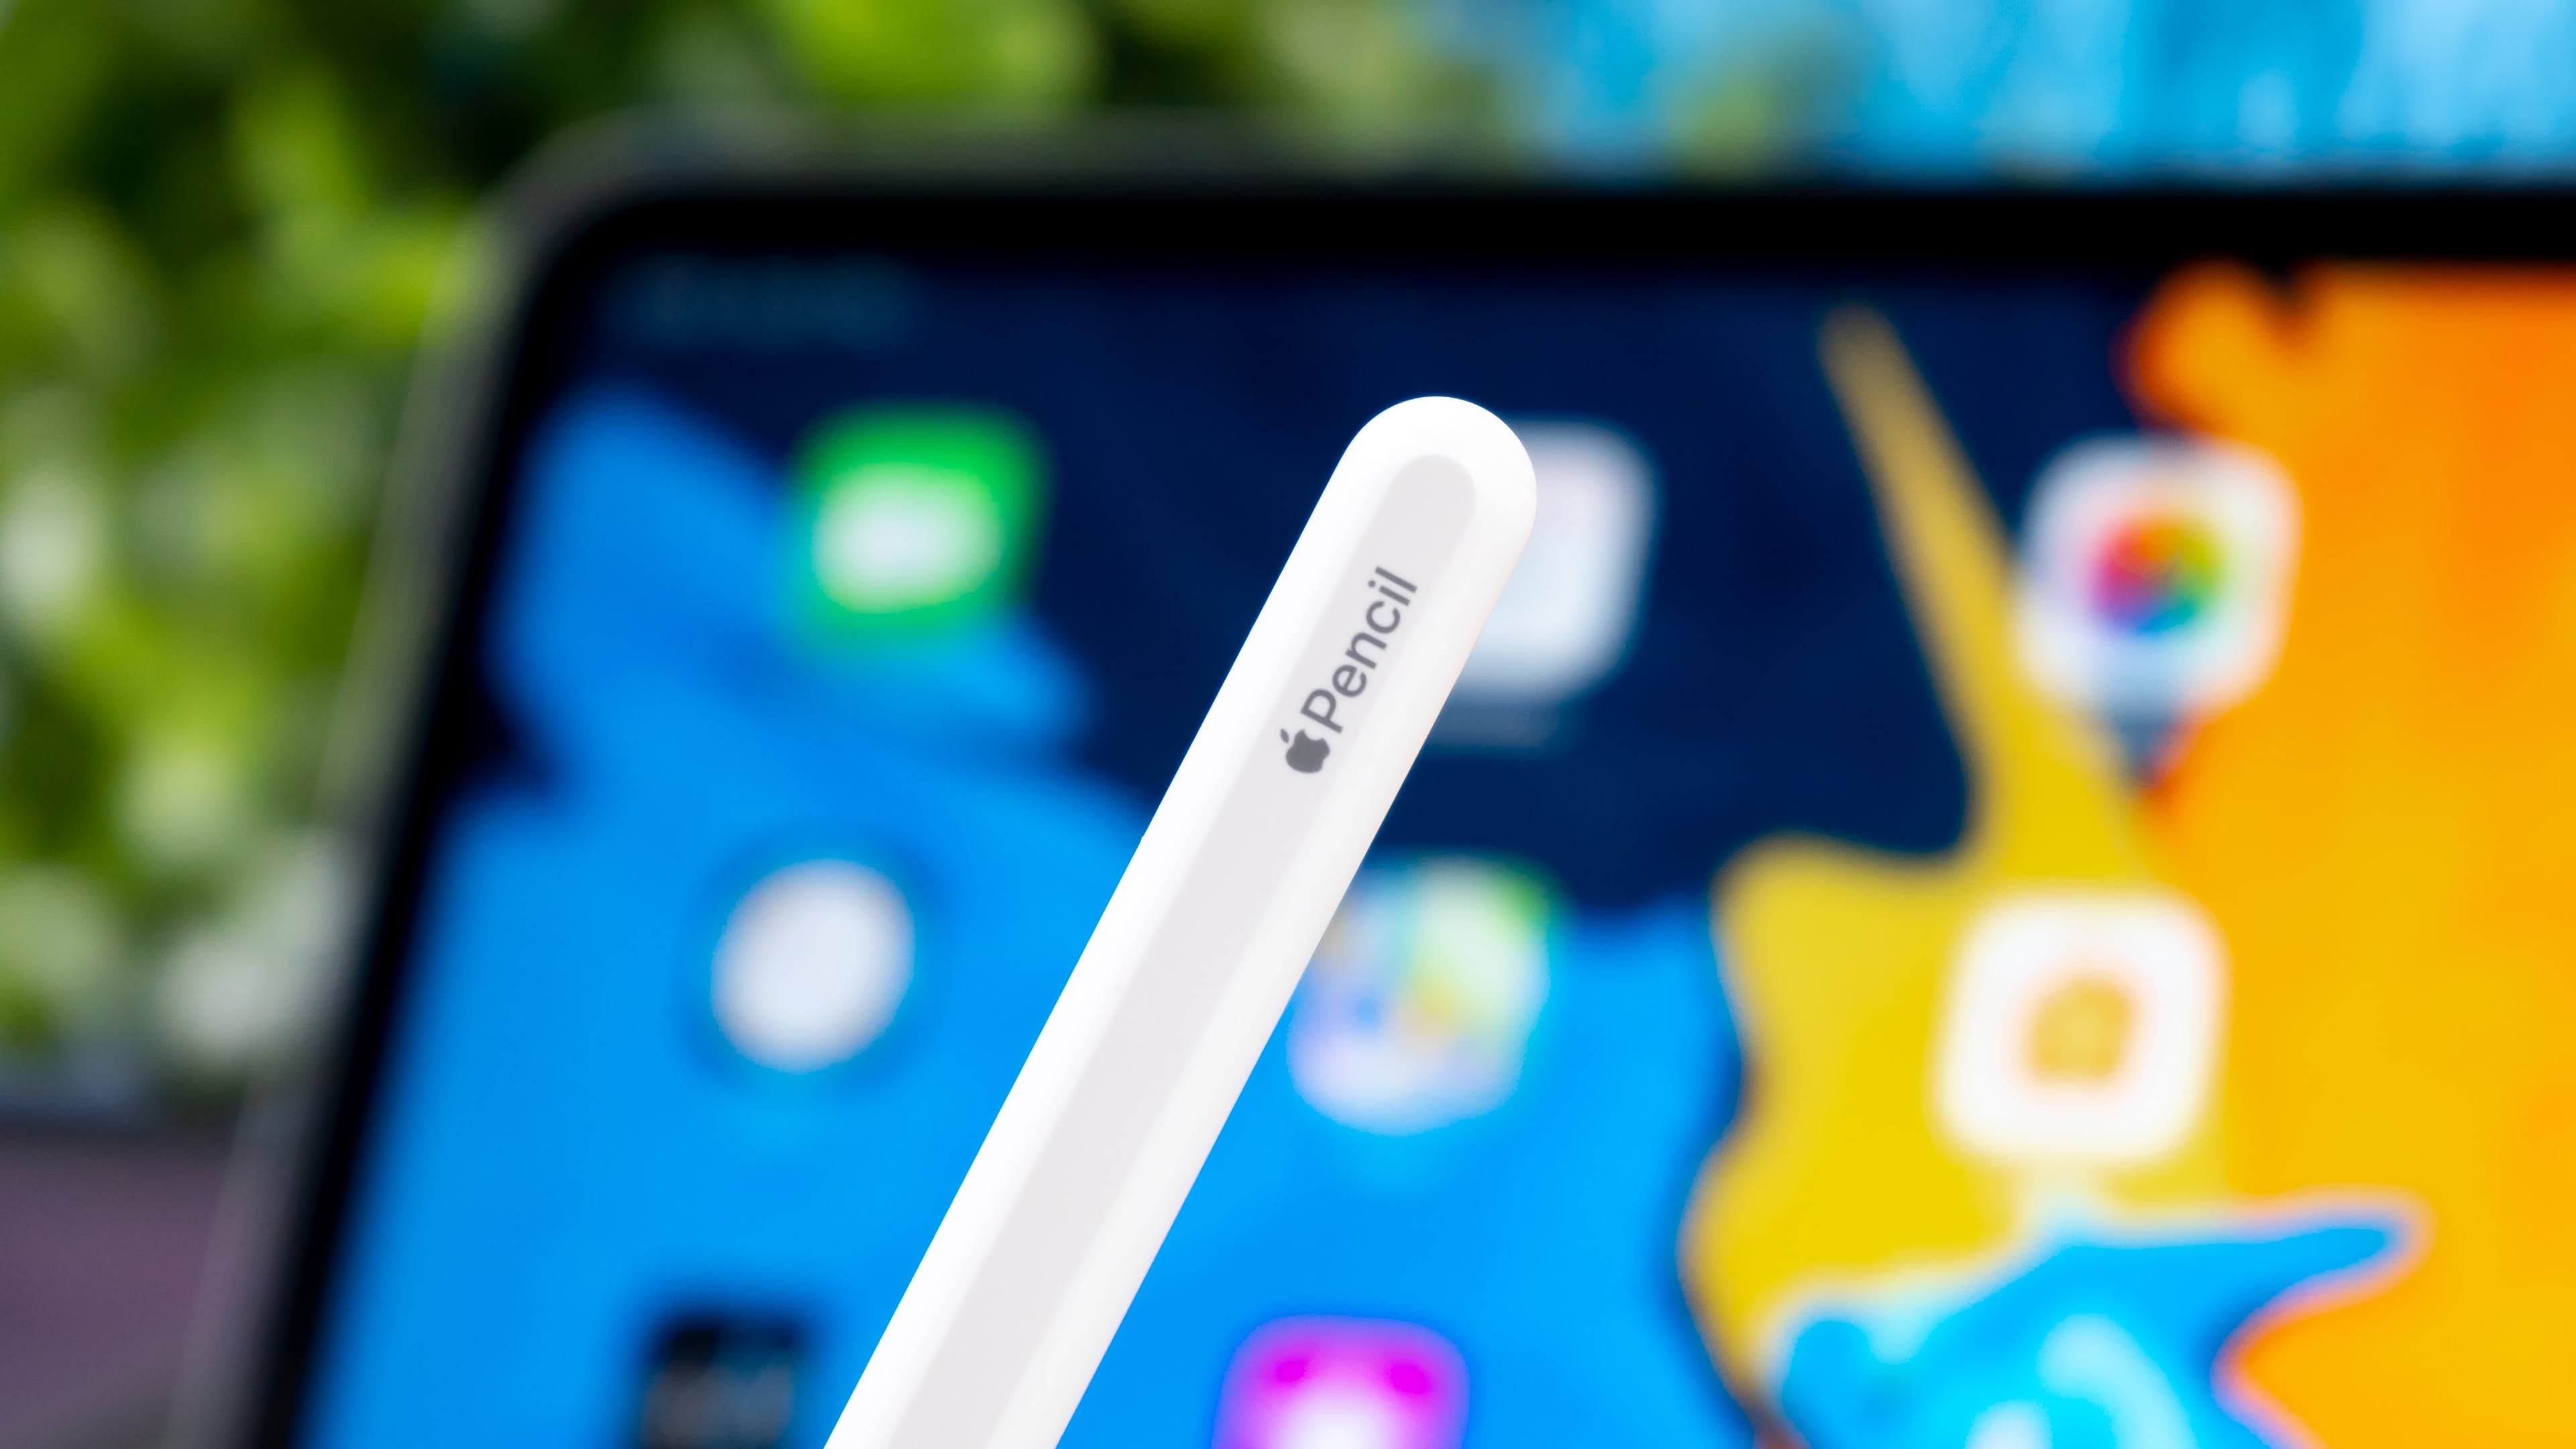 Apple Pencil could gain optical sensors to sample surface color and texture